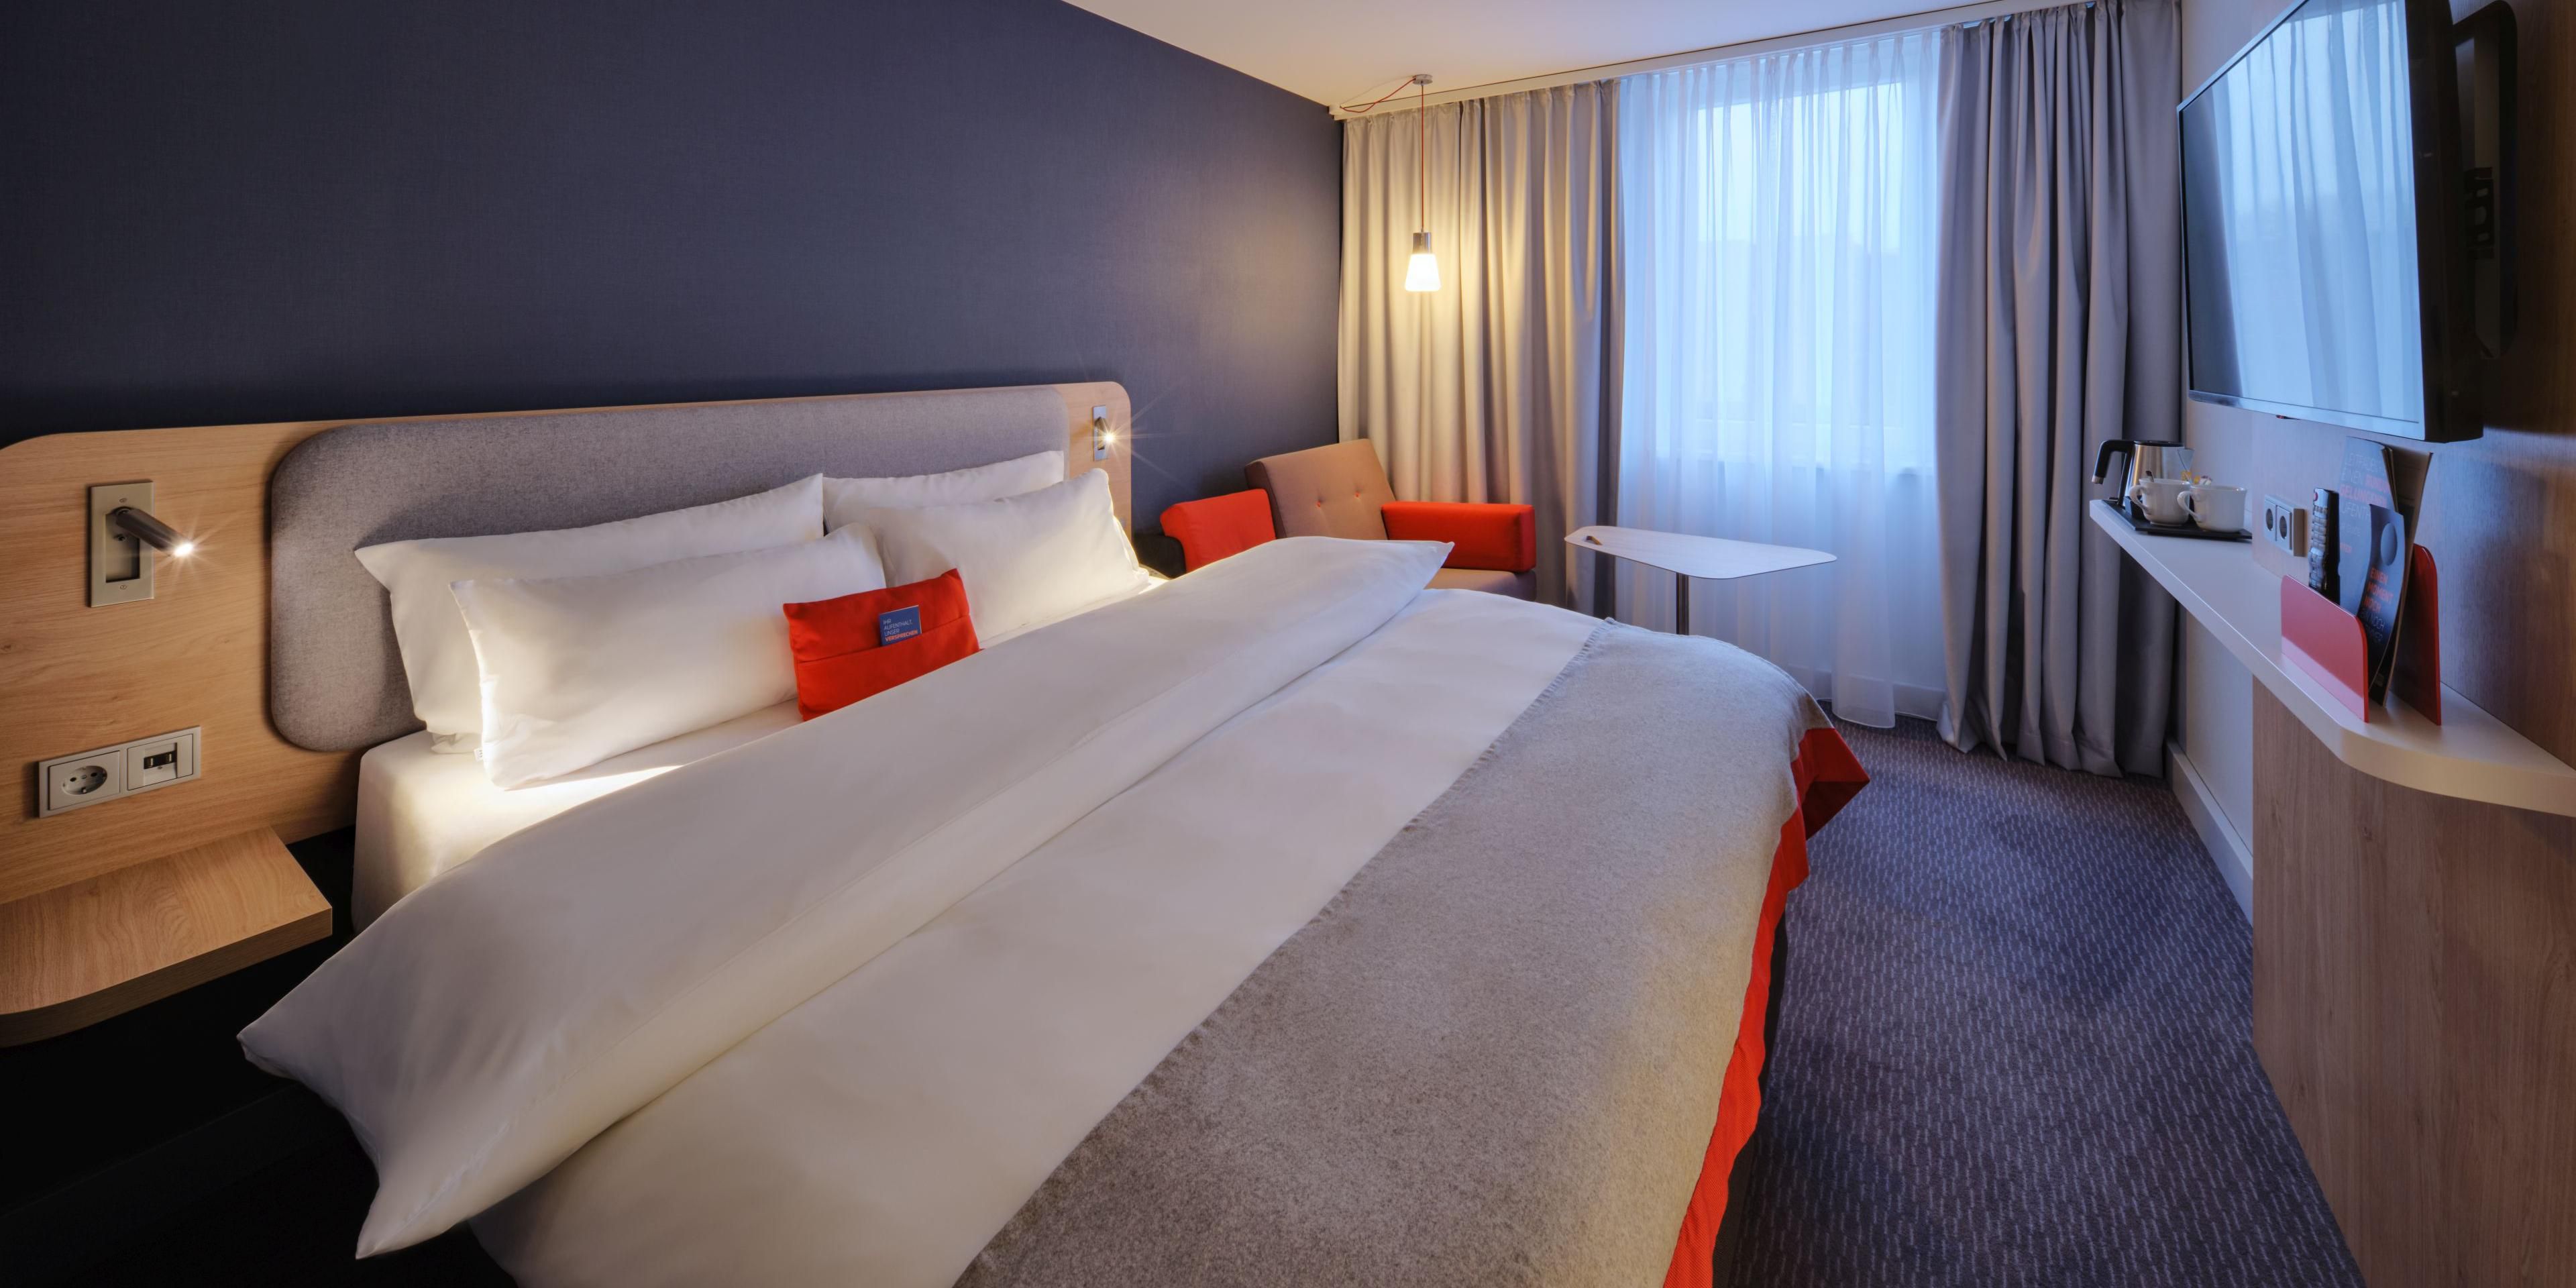 Drift off to sleep in our restful Next Generation guest rooms with blackout curtains and comfortable beds. They're decorated in calm shades enlivened by pops of colour and all have Flatscreen TVs, bedside USB ports and inclusive Wi-Fi. If you're travelling with kids, all our family rooms have sofa beds.